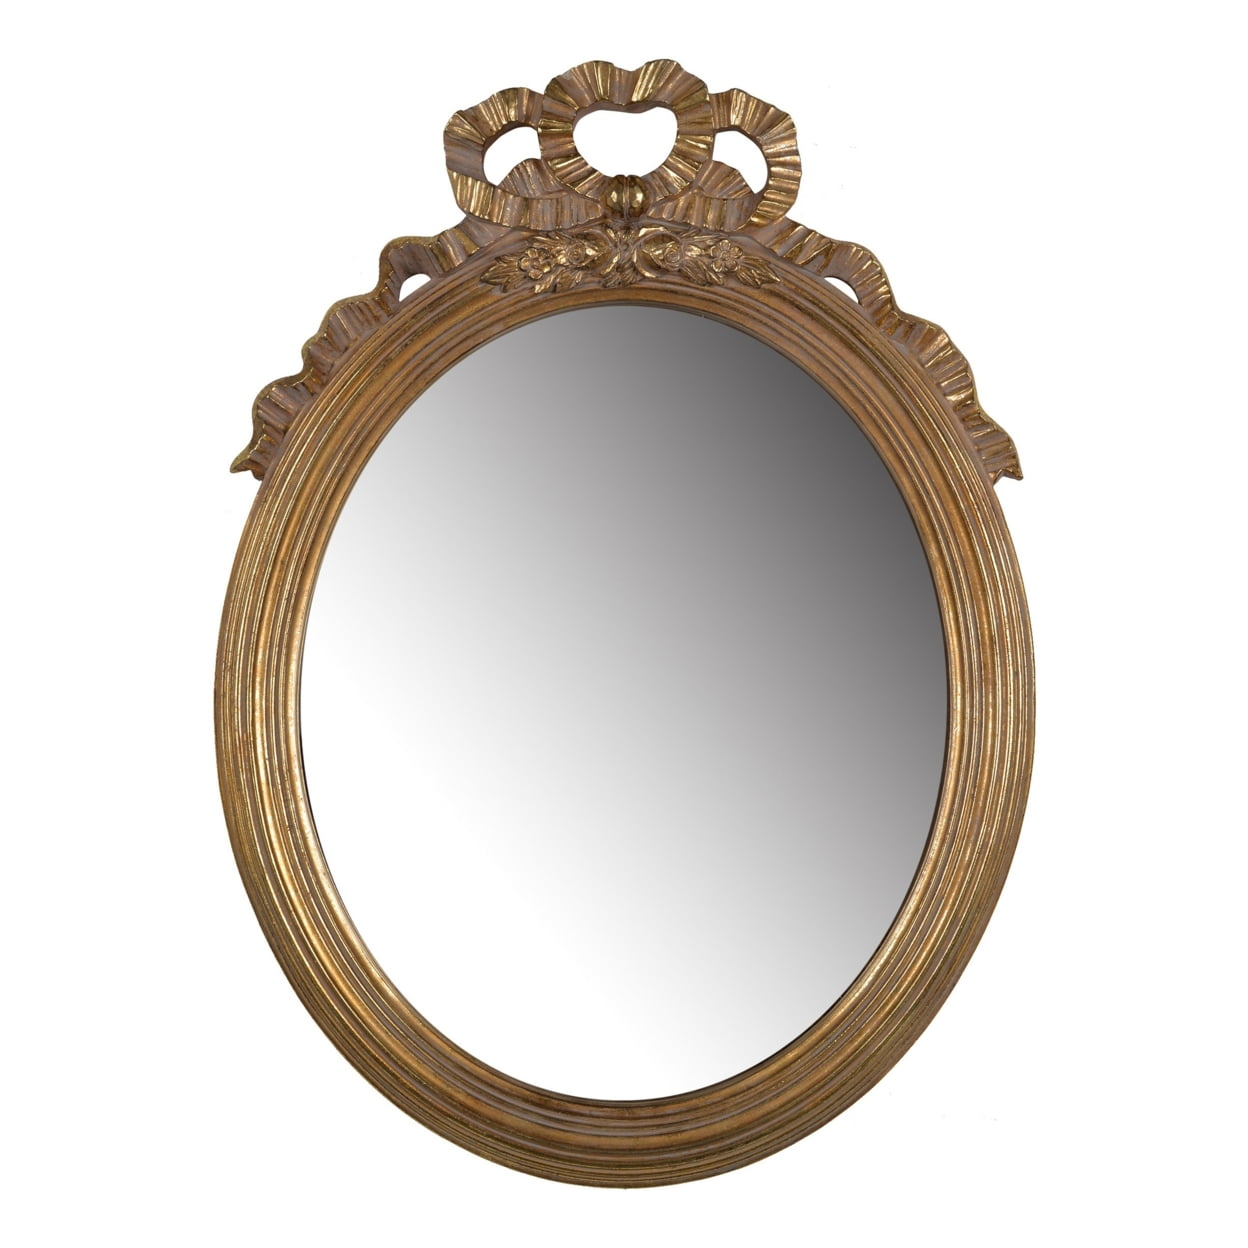 Picture of Benjara BM286122 26 in. Wall Accent Mirror with Ornate Polyresin Floral Crest, Antique Gold